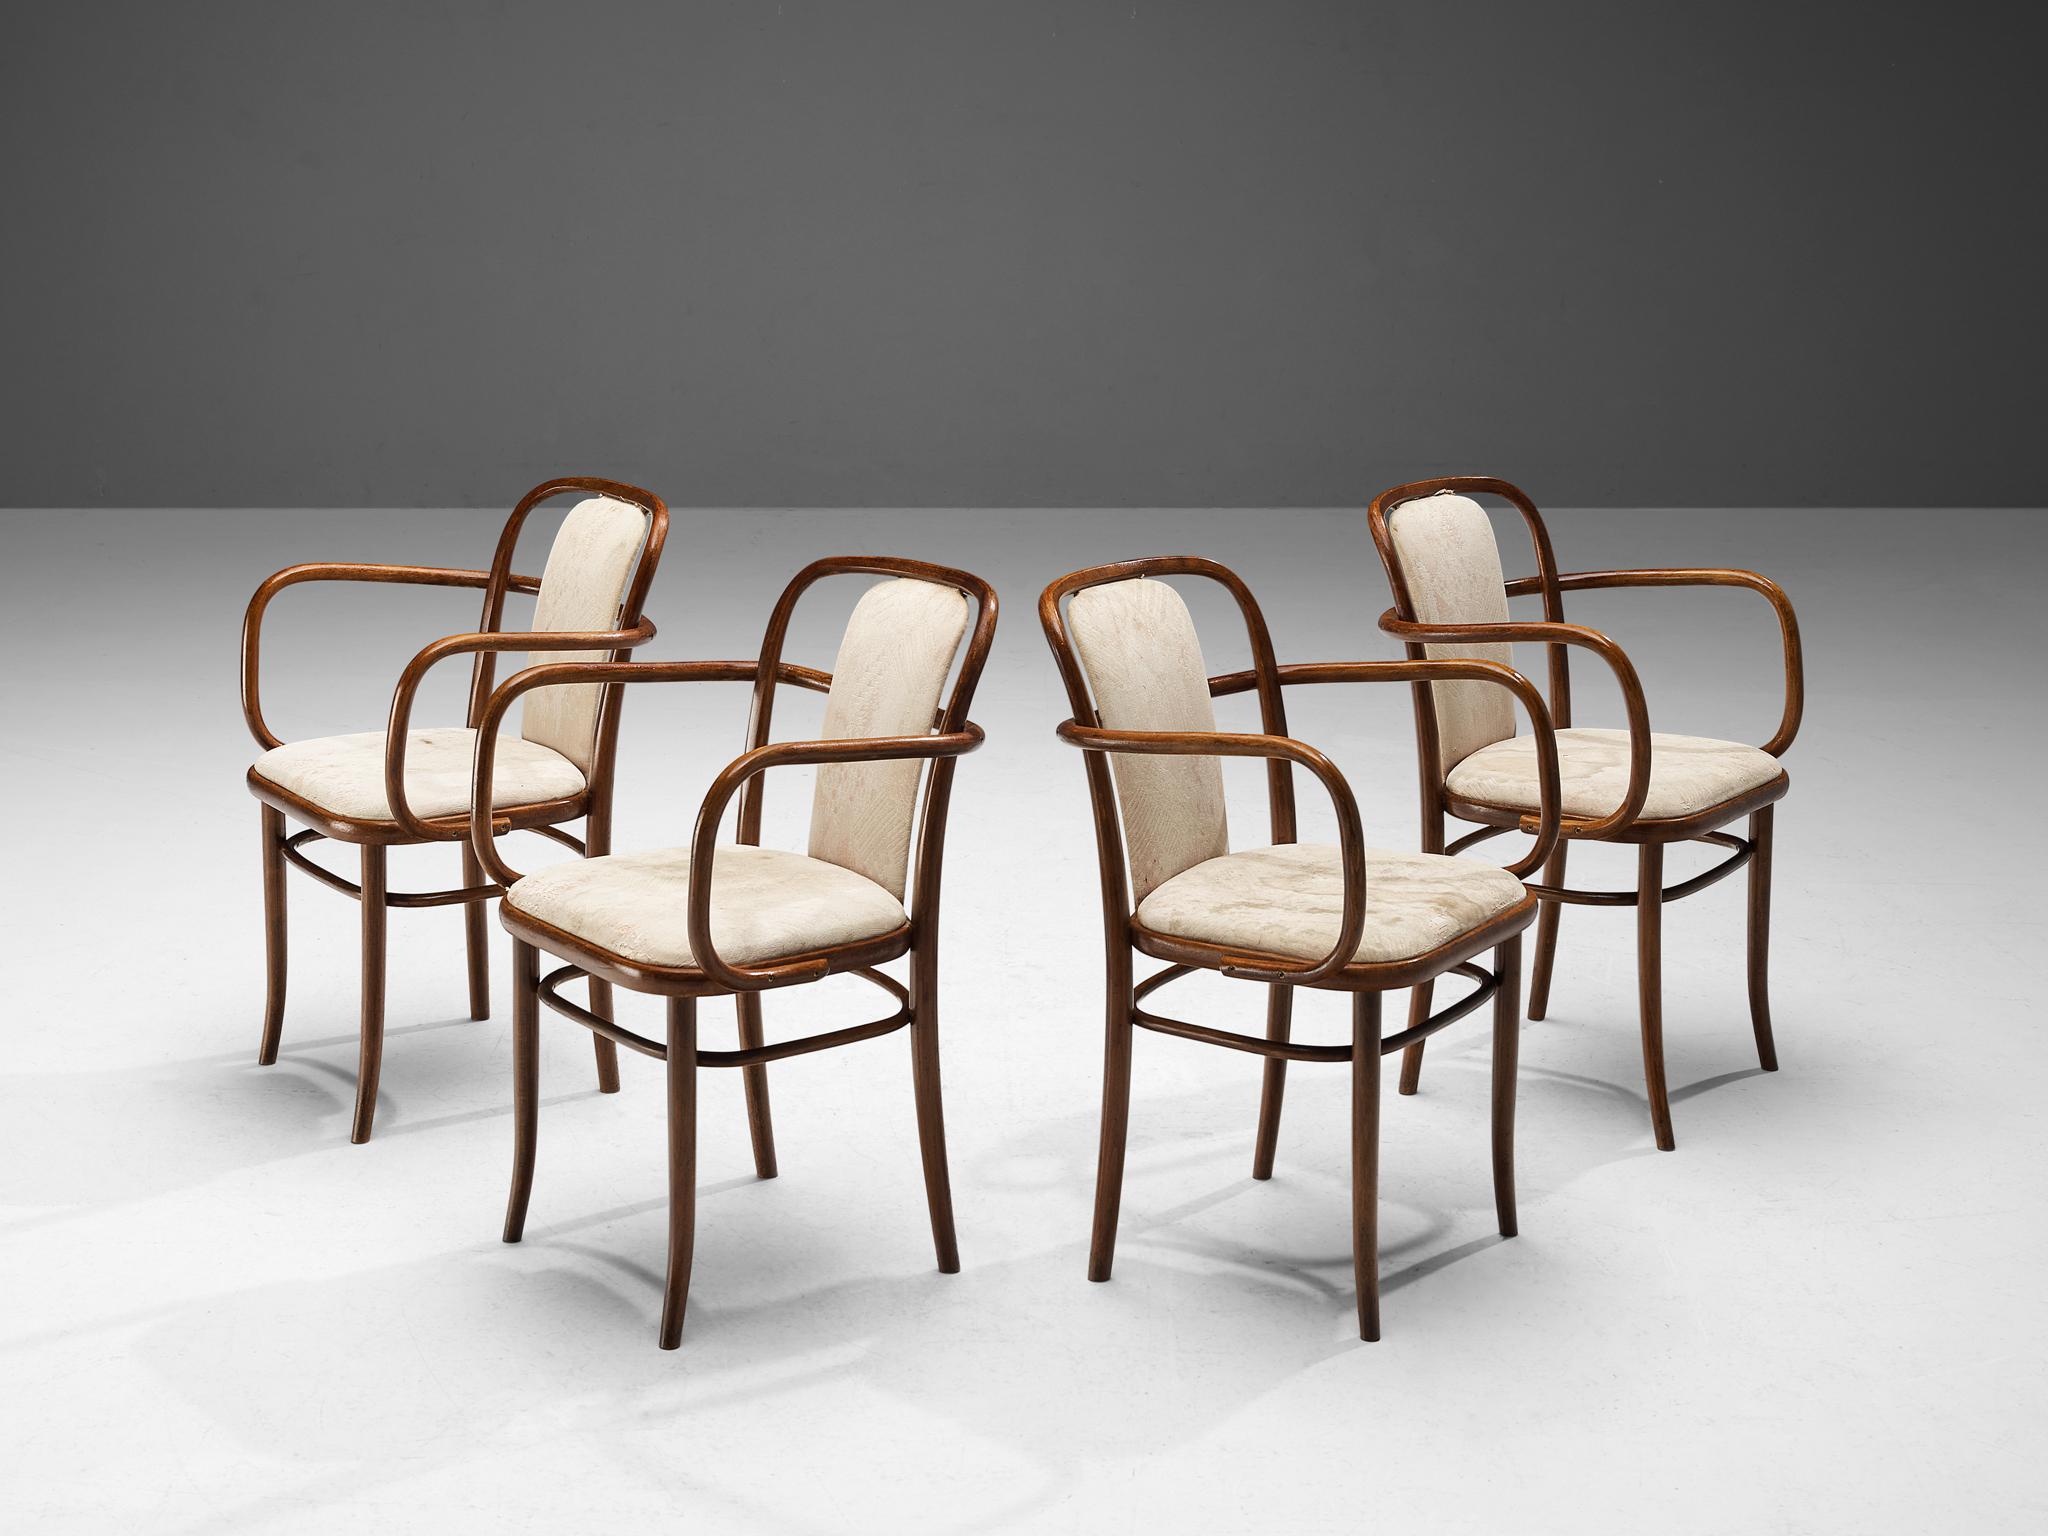 TON, armchairs, bentwood, fabric, Czech Republic, 1930s.

Elegant dining chairs made in bentwood. The lines and shapes are dynamic but in a soft sense, the light color of the backrest and seat also add to this serene appearance. These particular